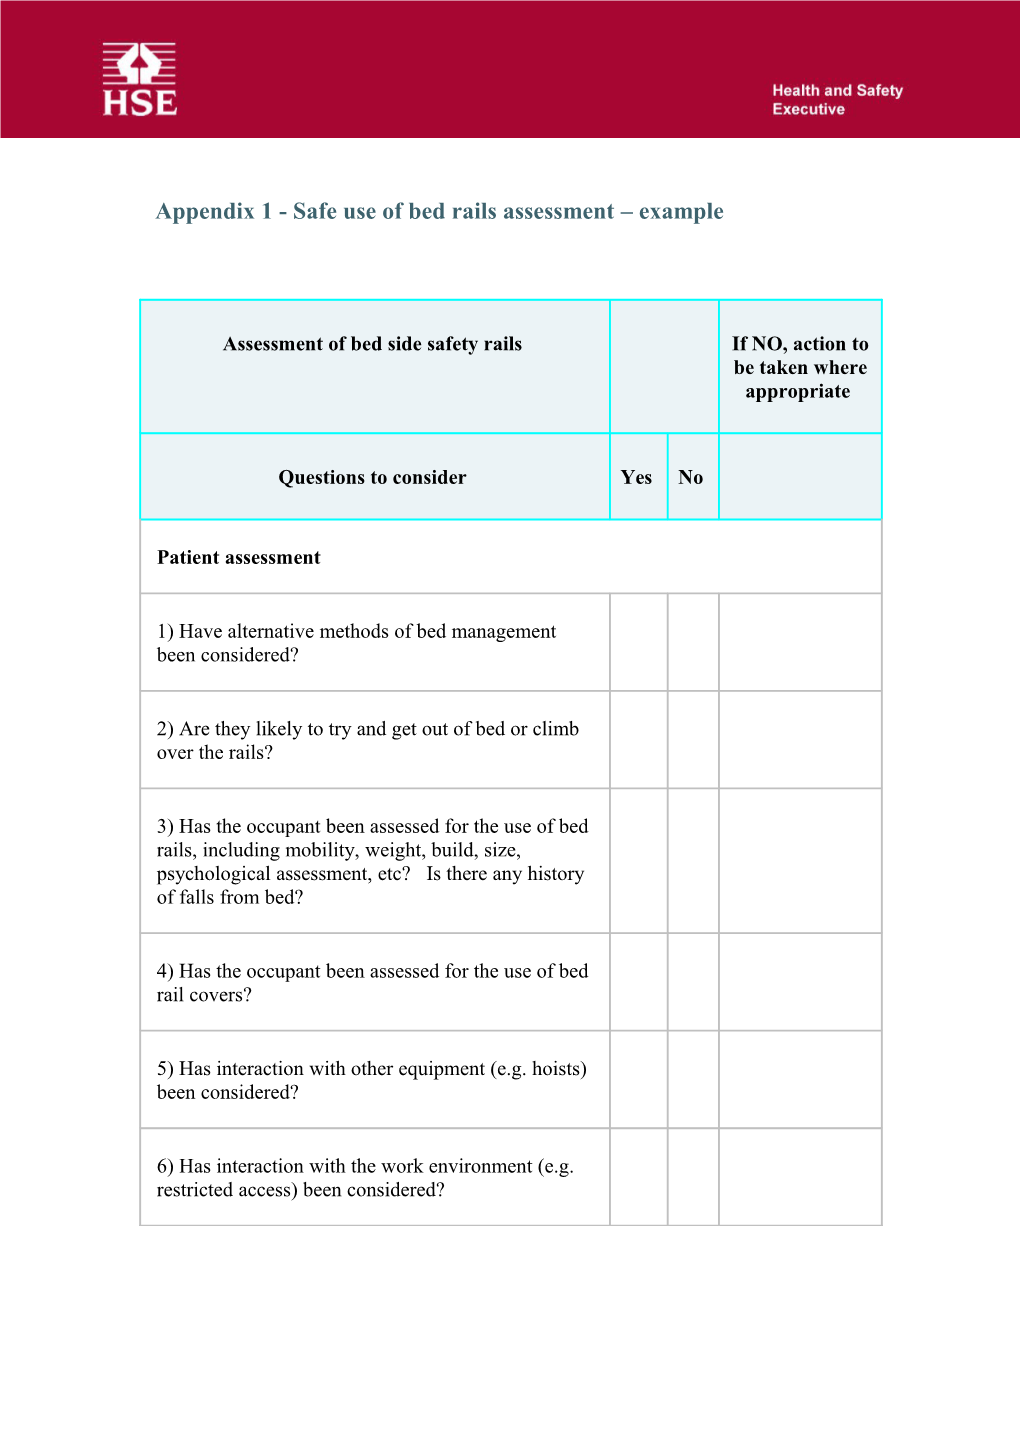 Appendix 1 - Safe Use of Bed Rails Assessment Example